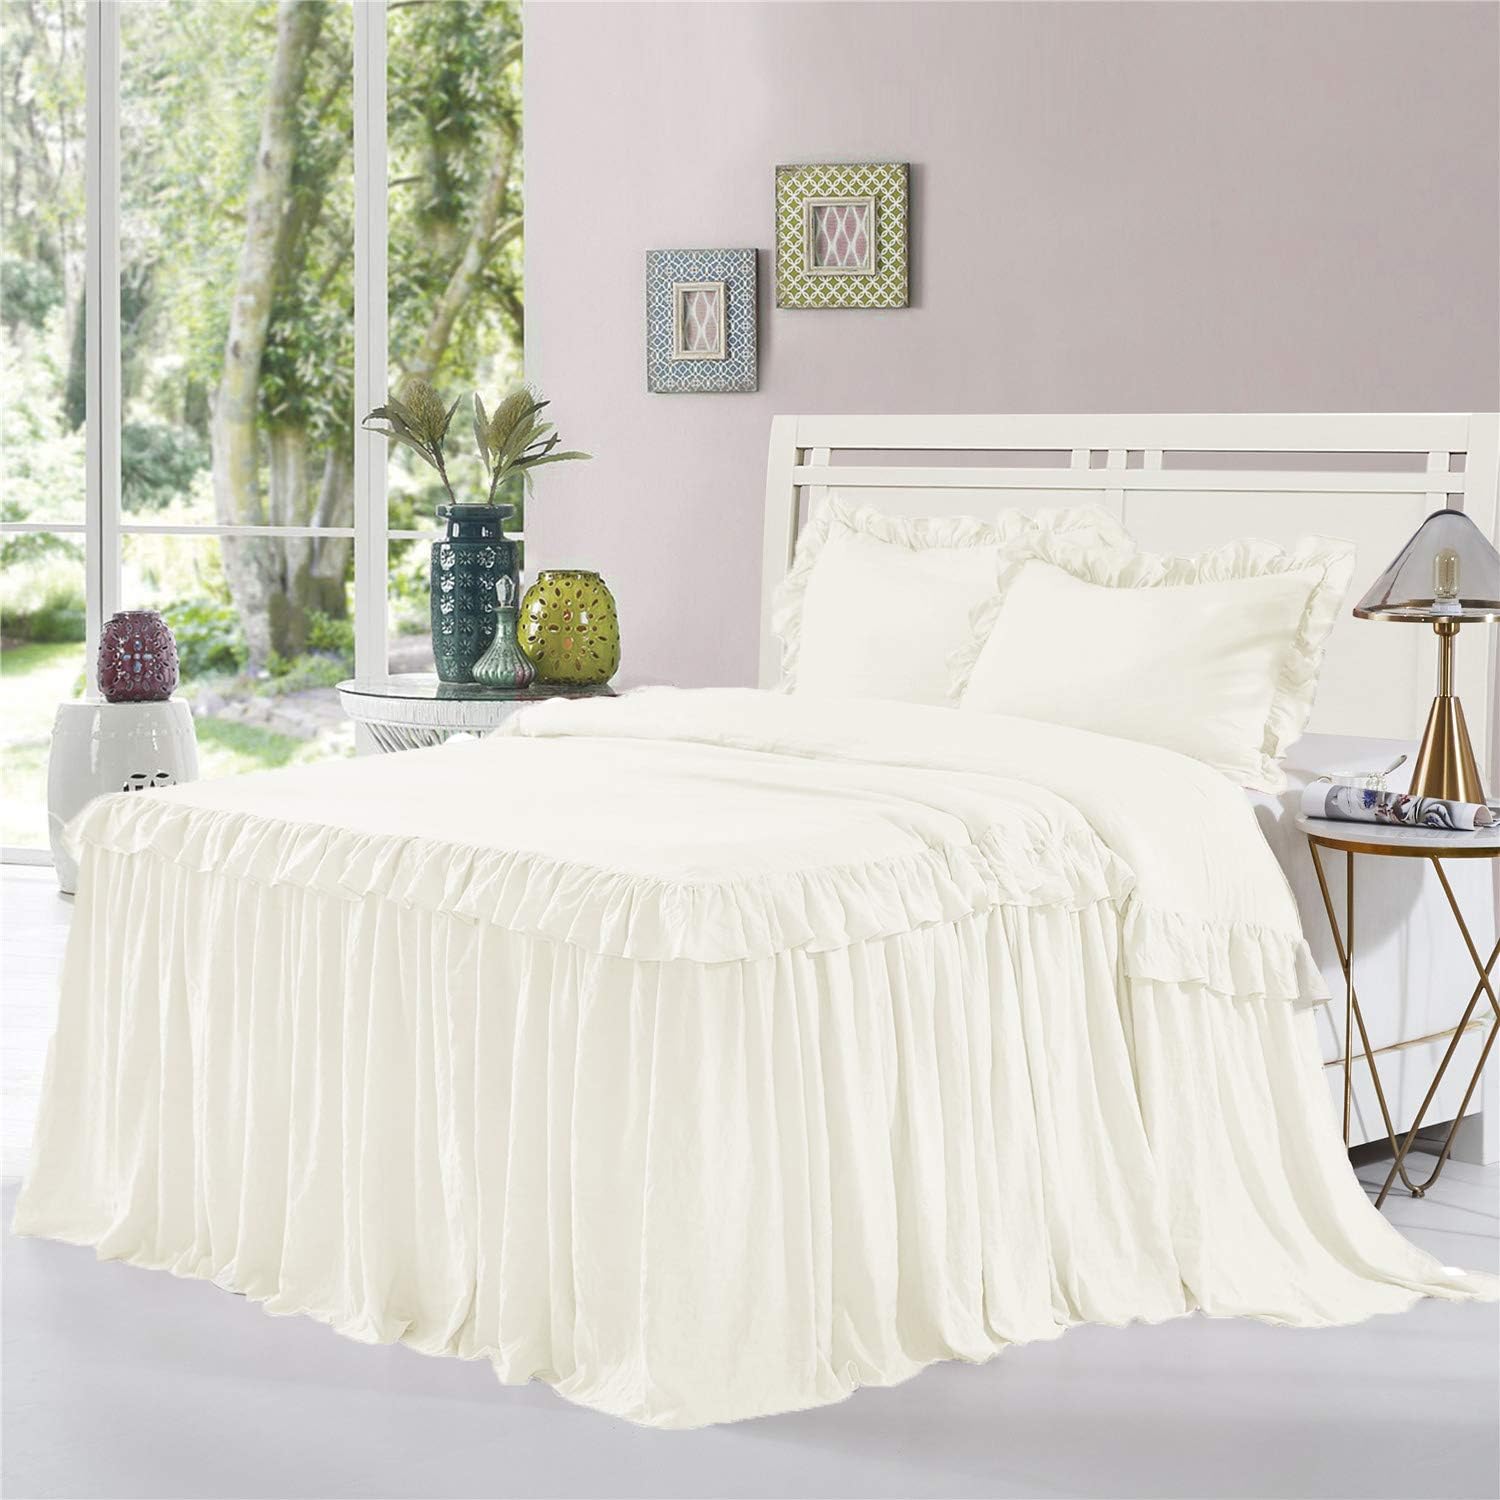 HIG 3 Piece Ruffle Skirt Bedspread Set King - Gray Color 30 inches